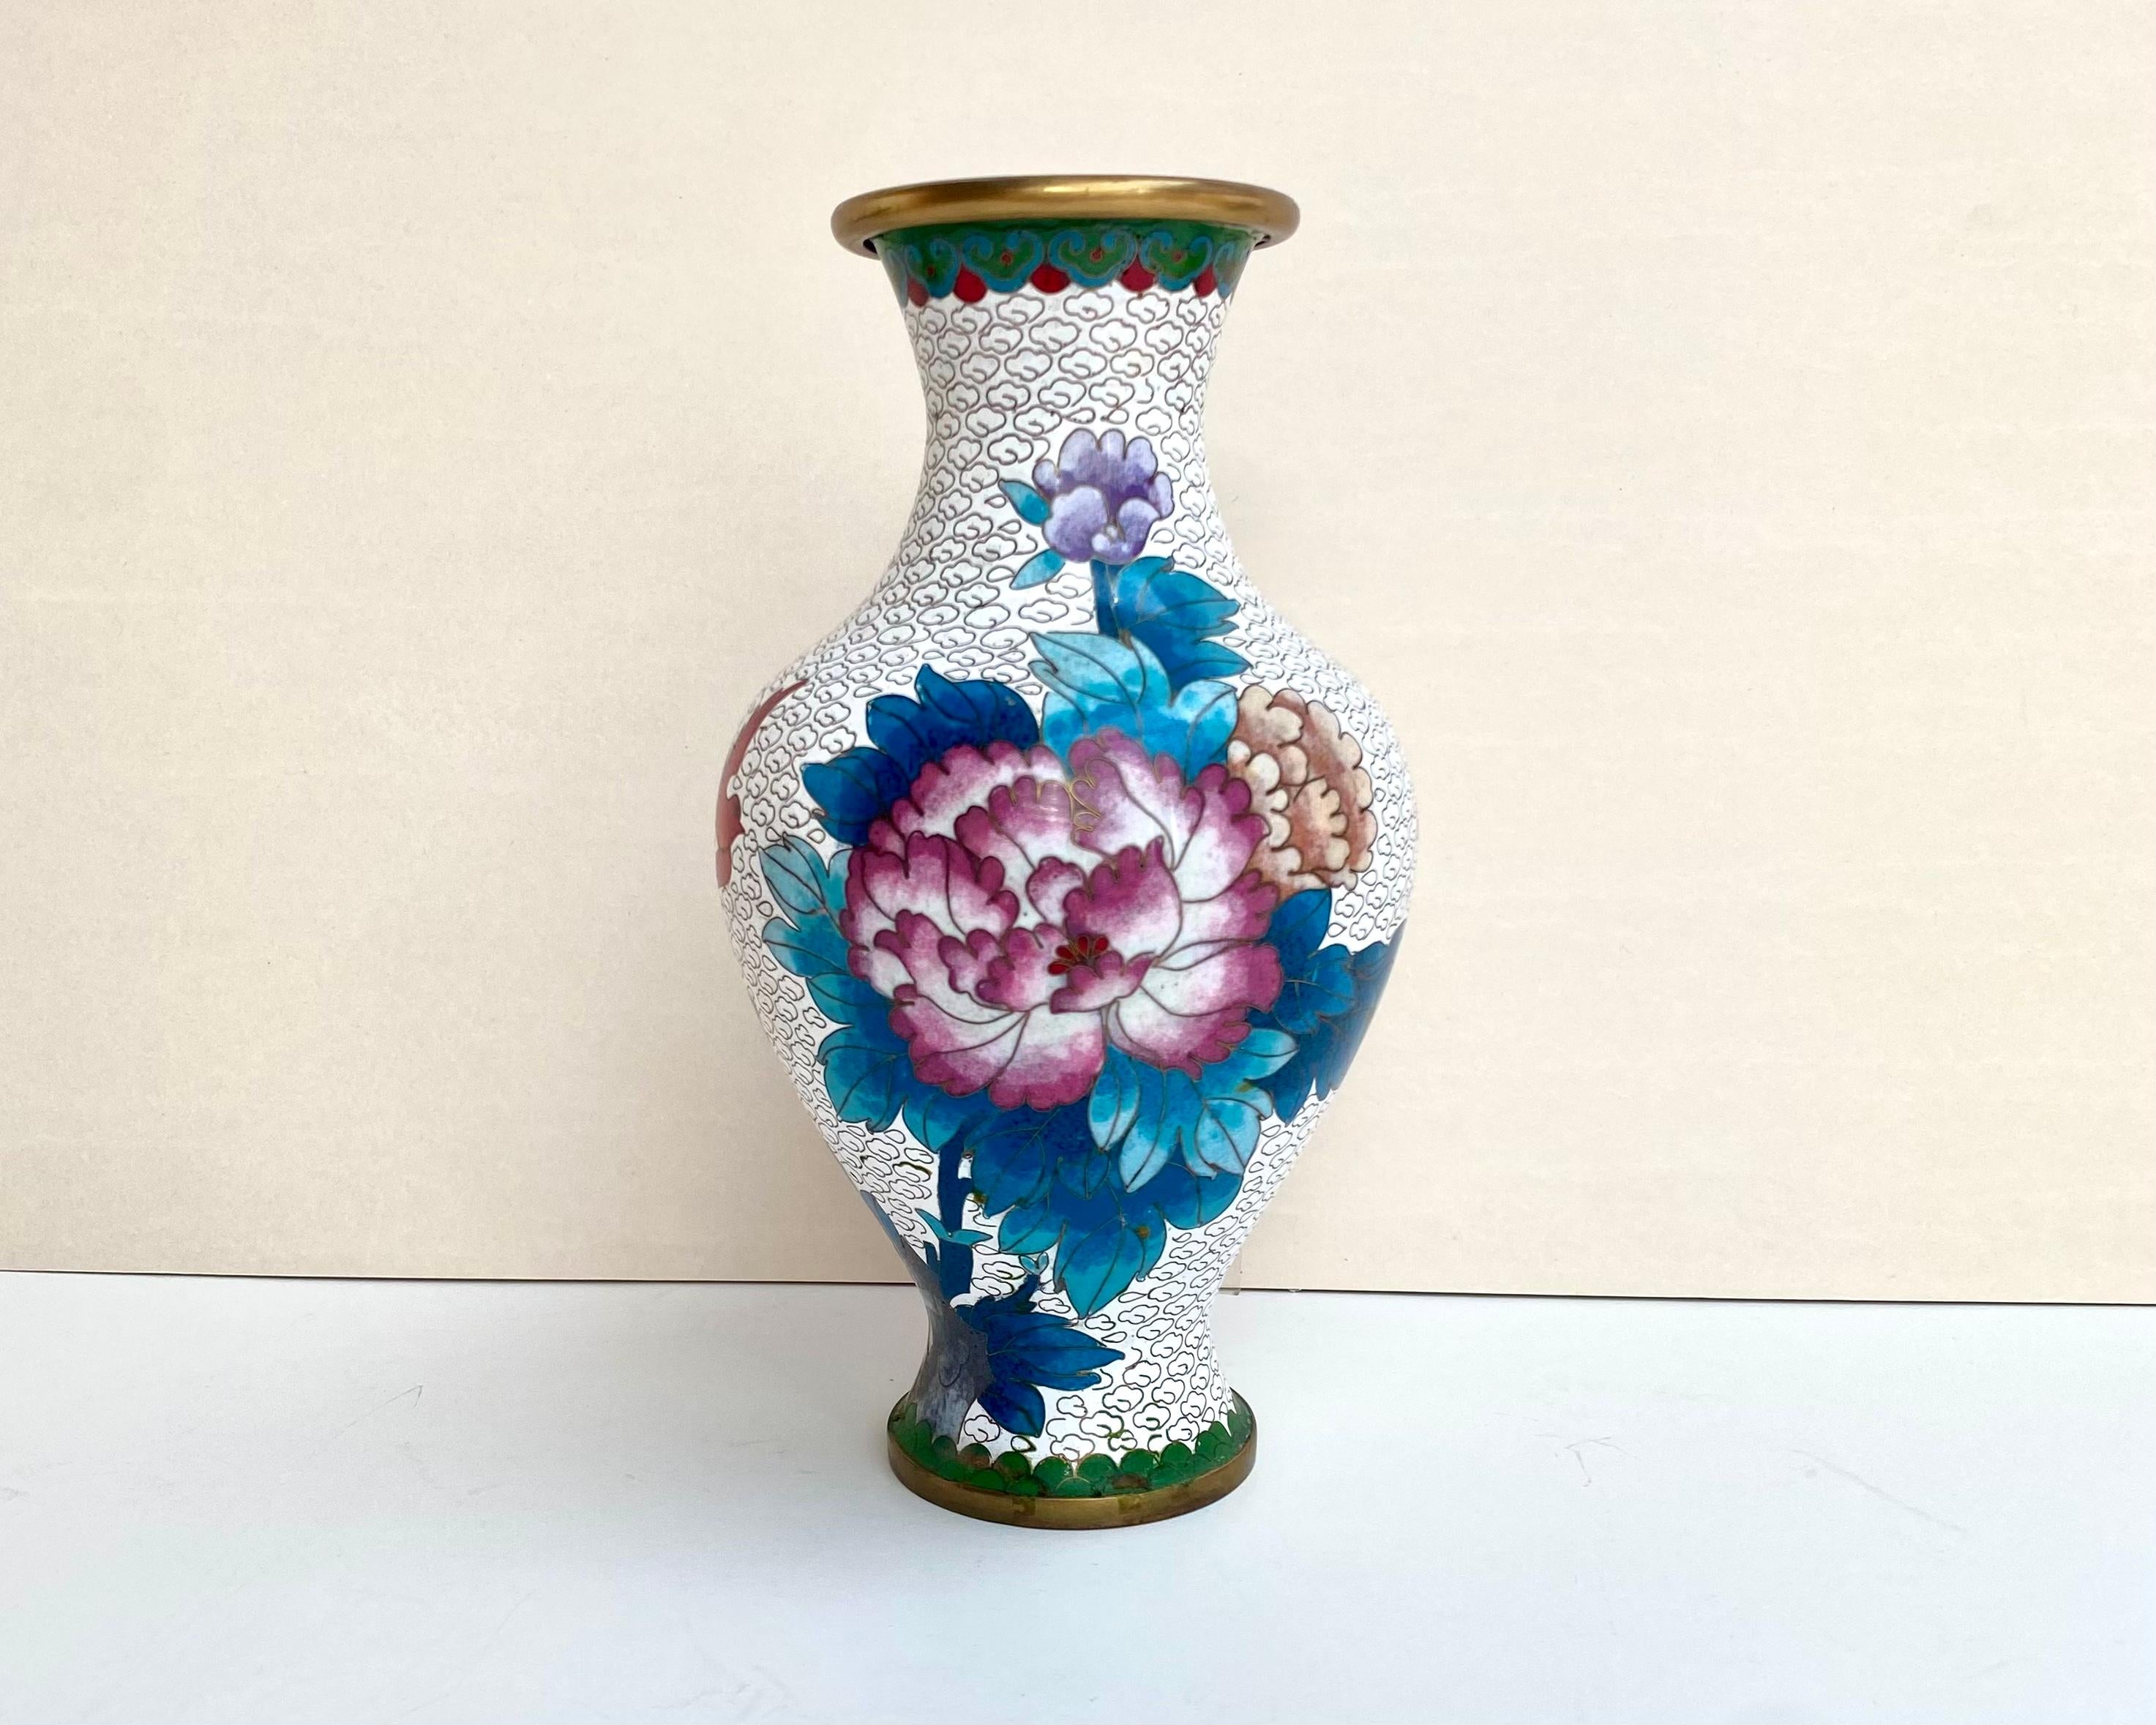 A vintage Chinese multicolor Cloisonne metal vase decorated with large flower pattern on the white background. 

The rim and the circular base bronze colored. This Cloisonné vase is finished in smooth enamel. 

The vase was created in China in